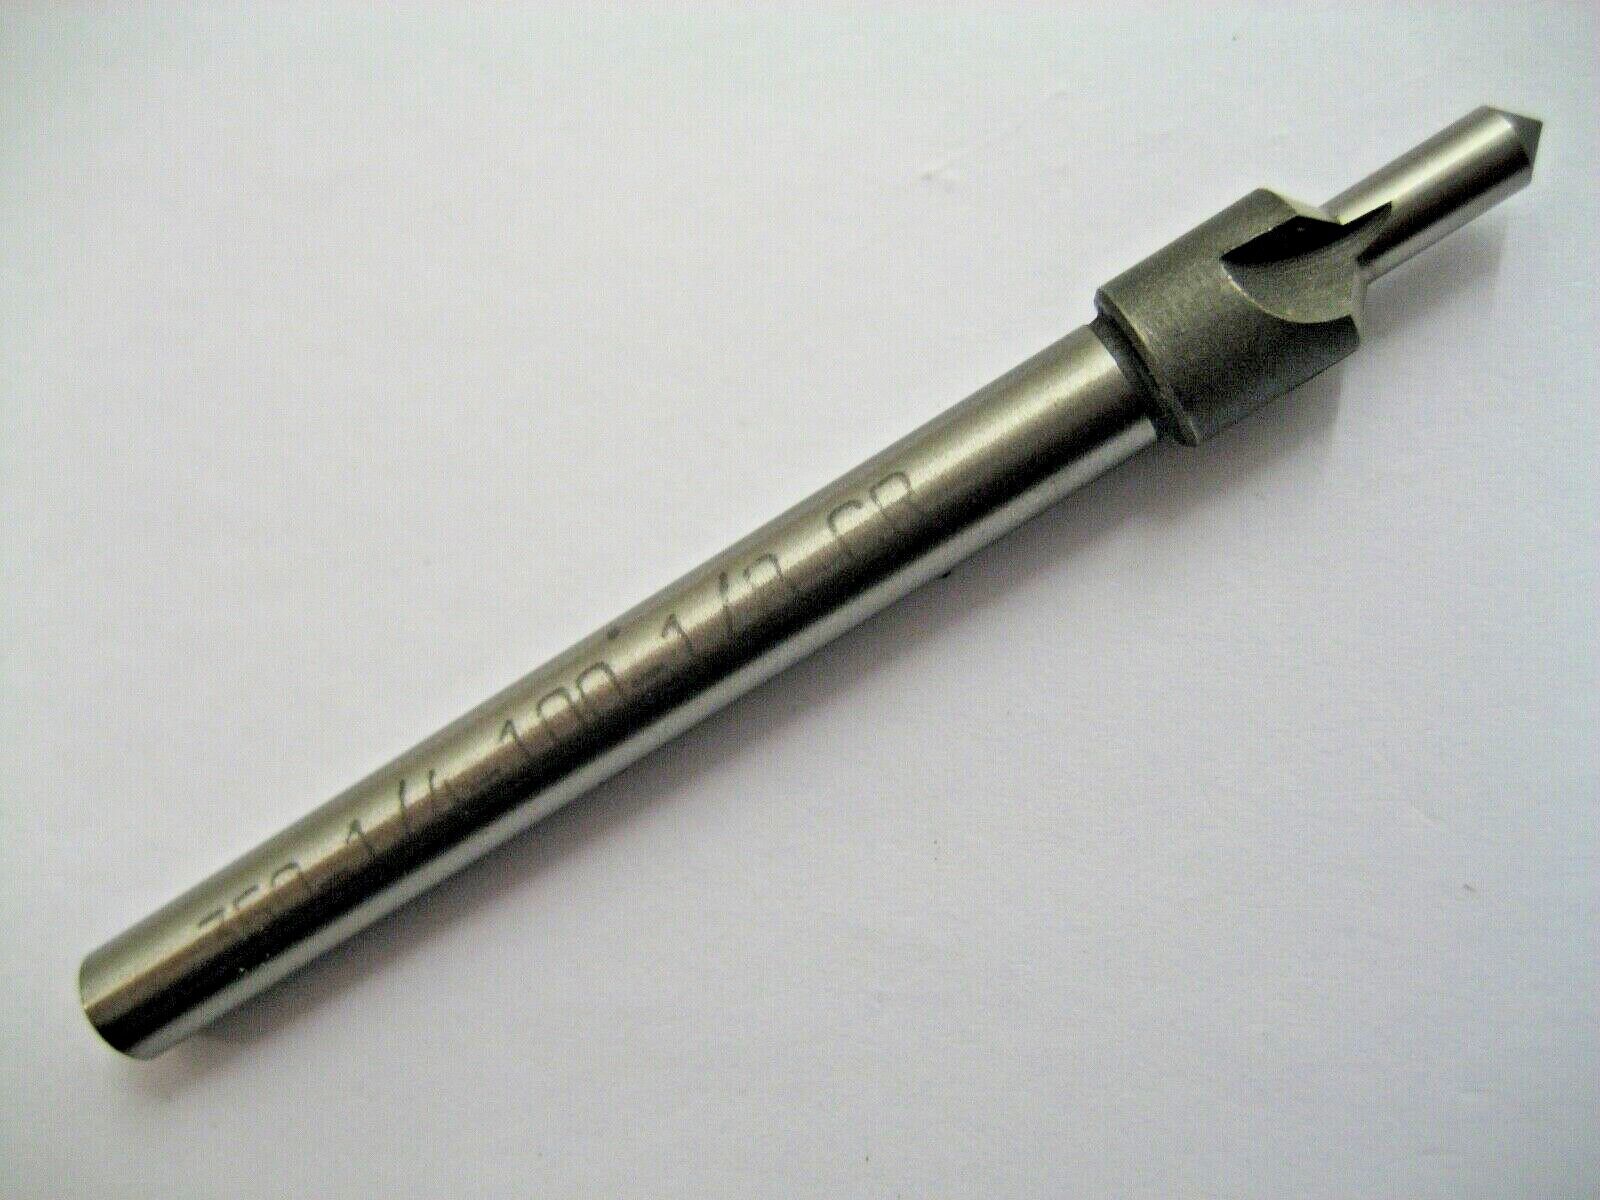 100 Super special price DEGREE COUNTERSINK 1 4 Same day shipping STEM TOOLS PILOTED AIRCRAFT 6.35mm